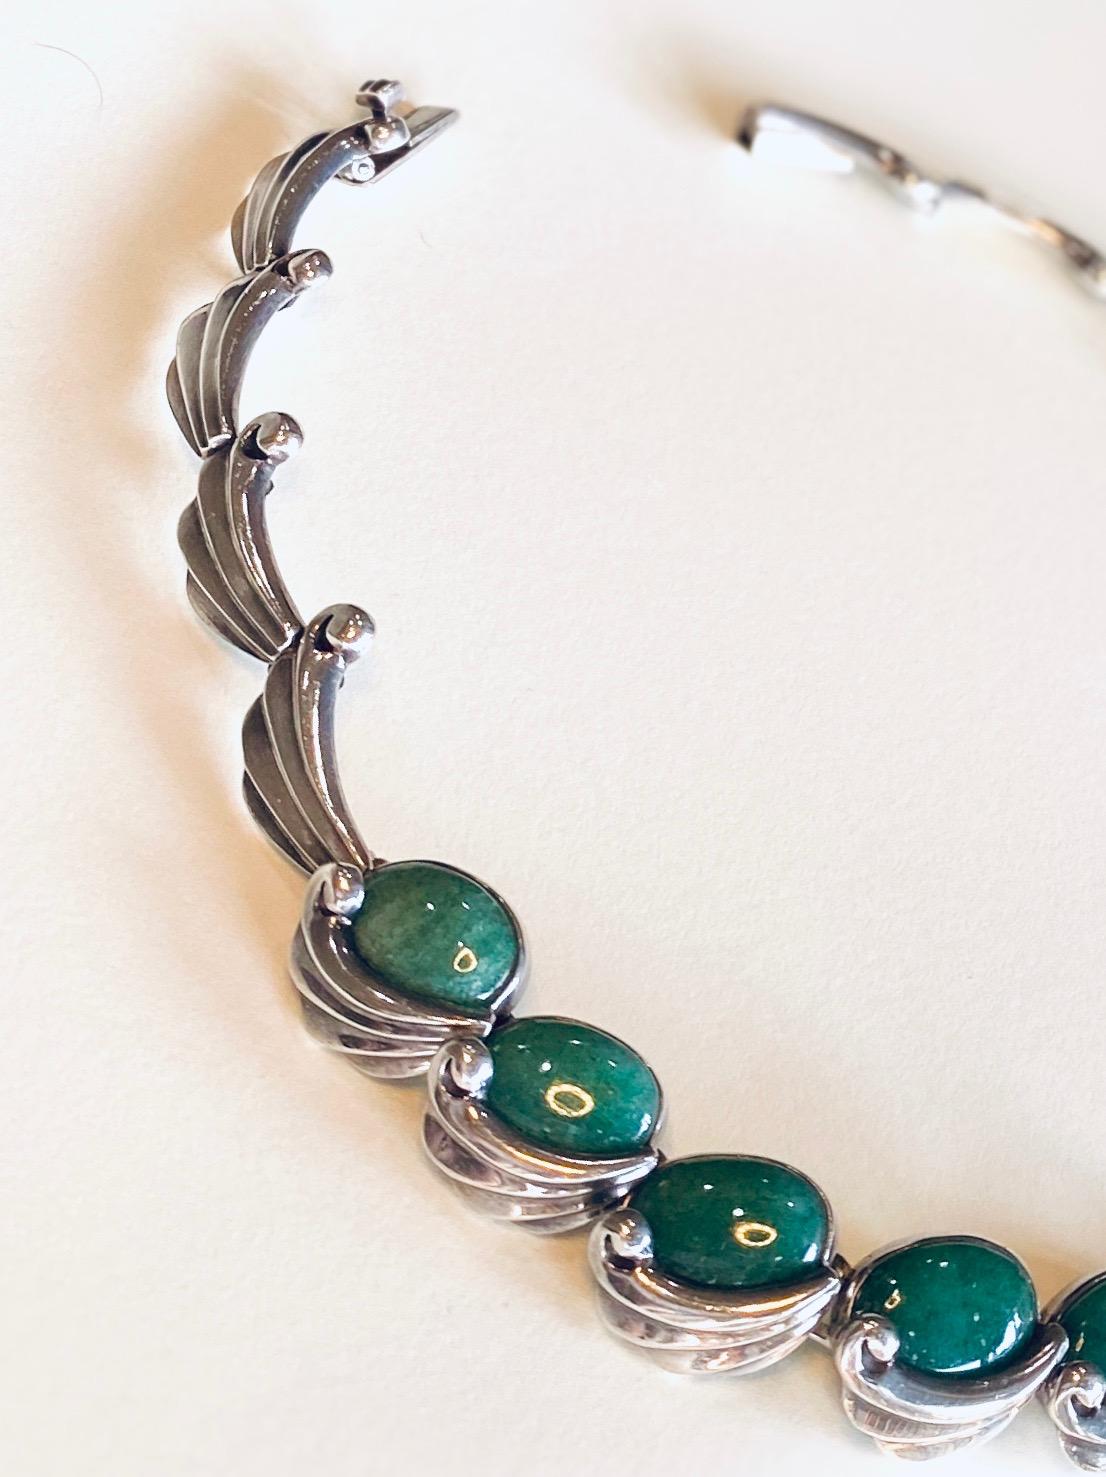 Antonio Pineda 970. Silver Aventurine Quartz Necklace

Stunningly designed Oval aventurine quartz set in expertly crafted silver waves 

Mexican Modern Design 

Matching Bracelet and Earrings Set Available 

Designer: Antonio Pineda 
Maker: Antonio